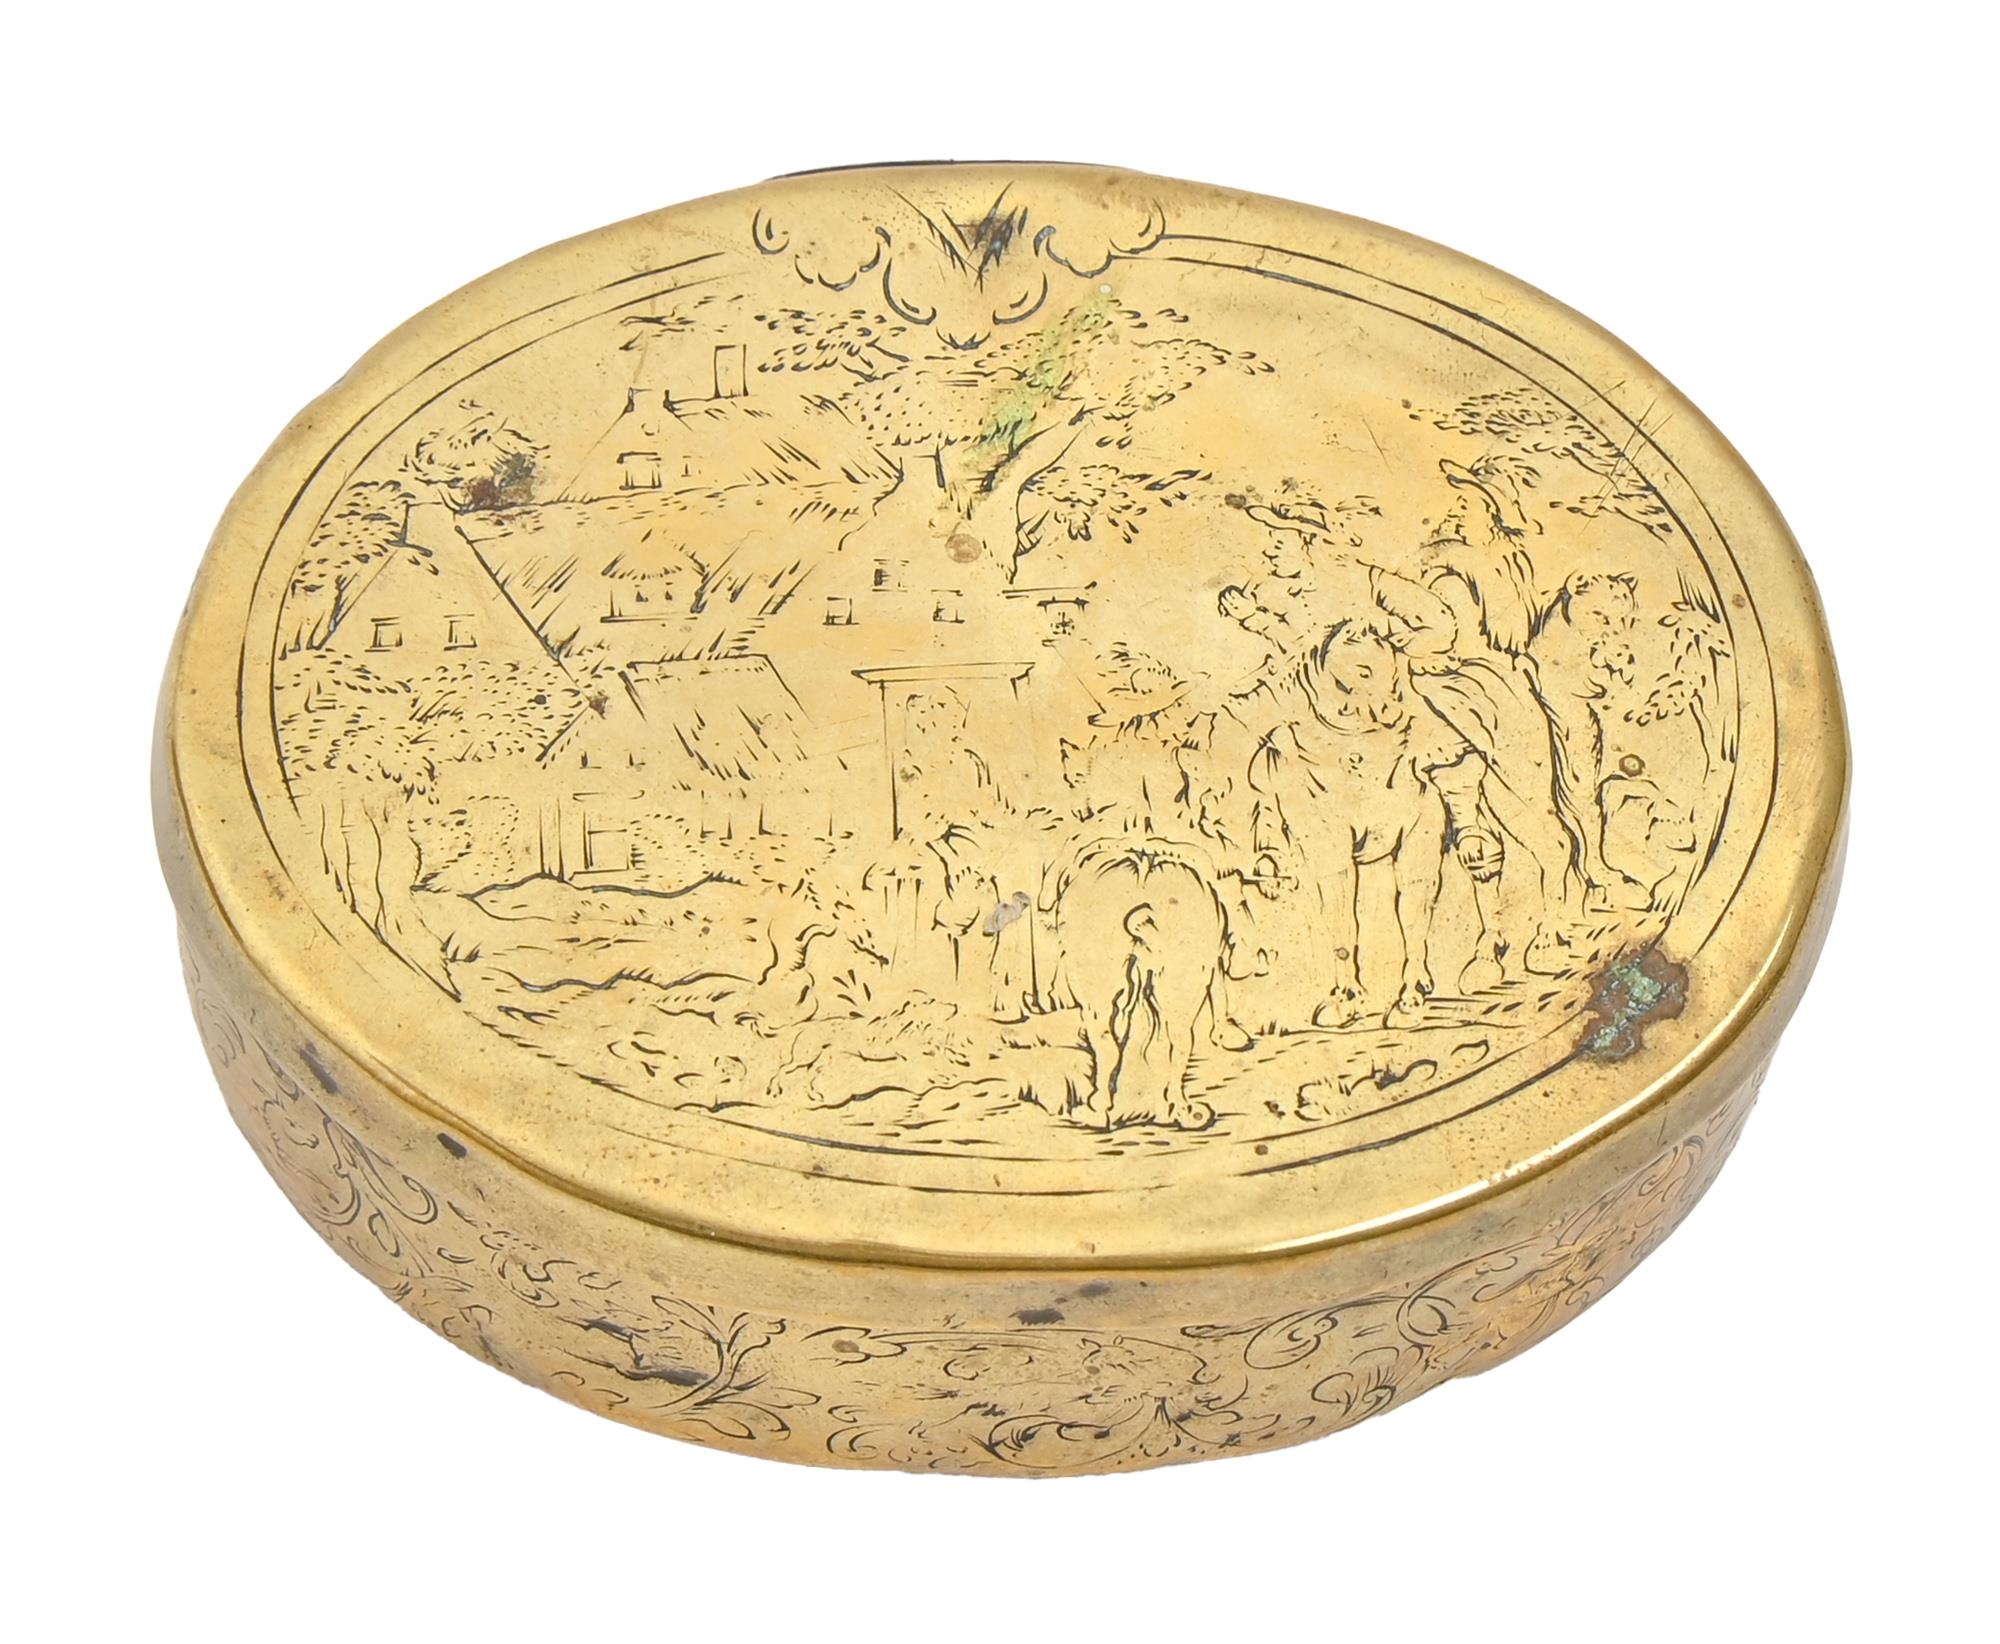 A Dutch oval brass tobacco box, late 18th c, the lid engraved with peasants by a house, the